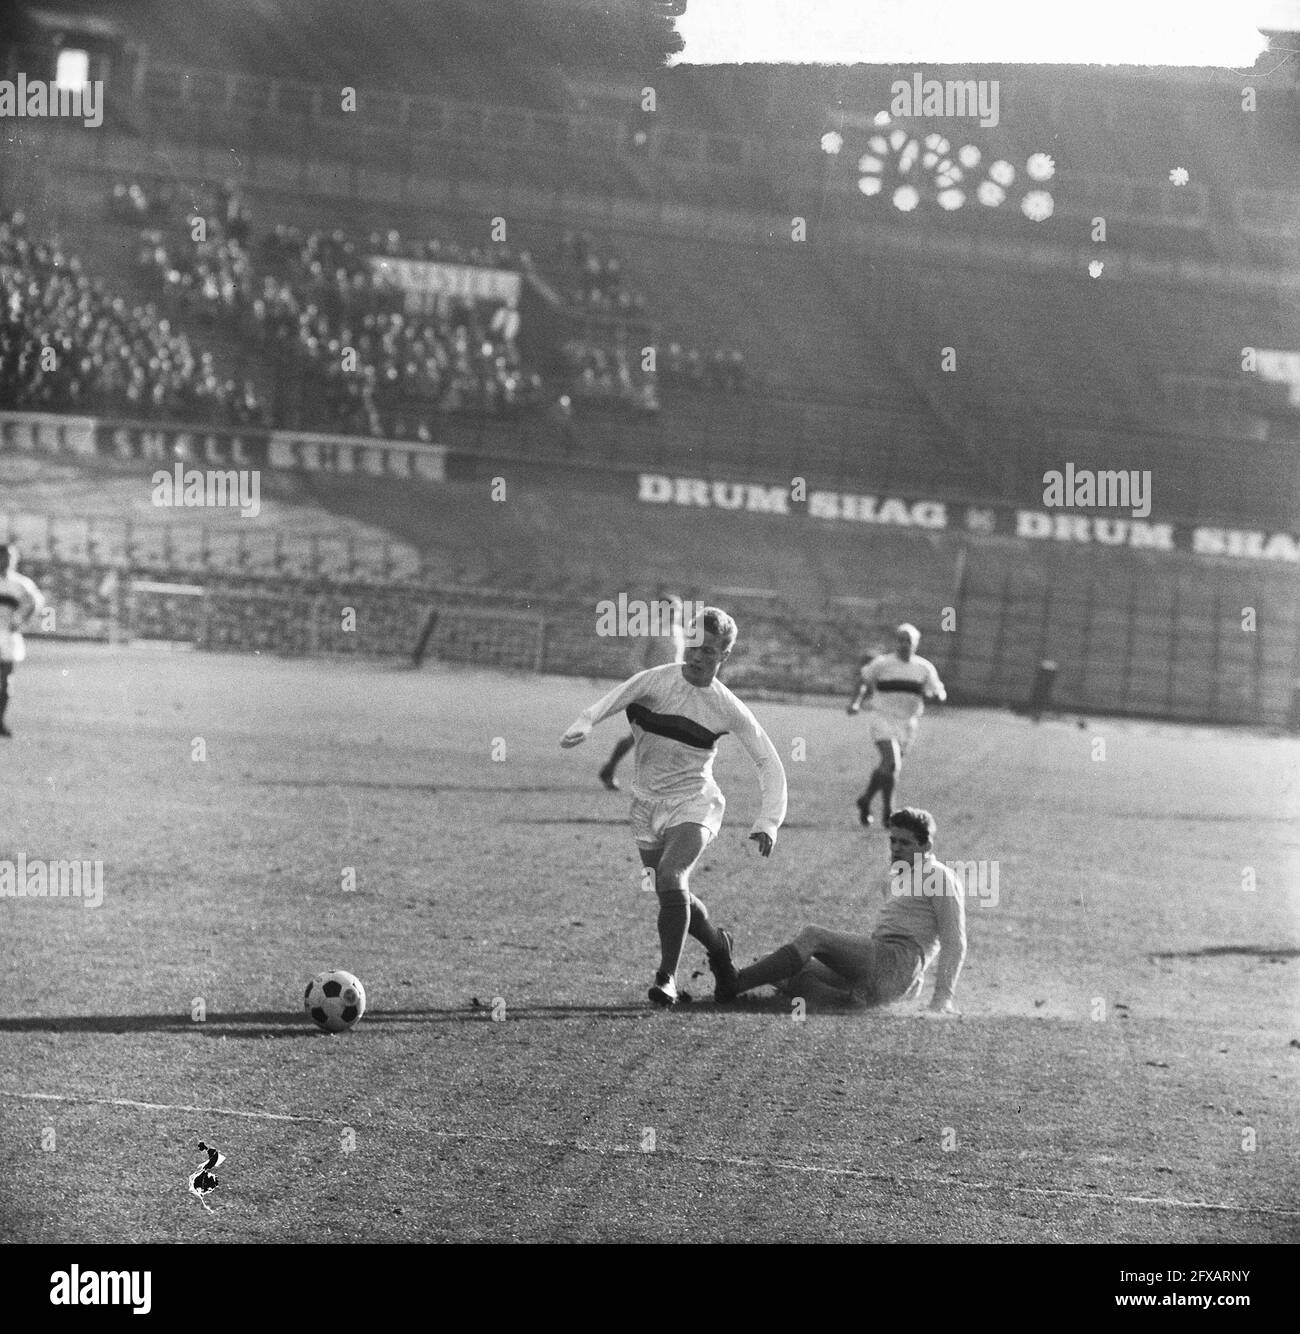 DWS against Sittardia 2-0, Huub Lenz in action, January 31, 1965, sports, soccer, The Netherlands, 20th century press agency photo, news to remember, documentary, historic photography 1945-1990, visual stories, human history of the Twentieth Century, capturing moments in time Stock Photo